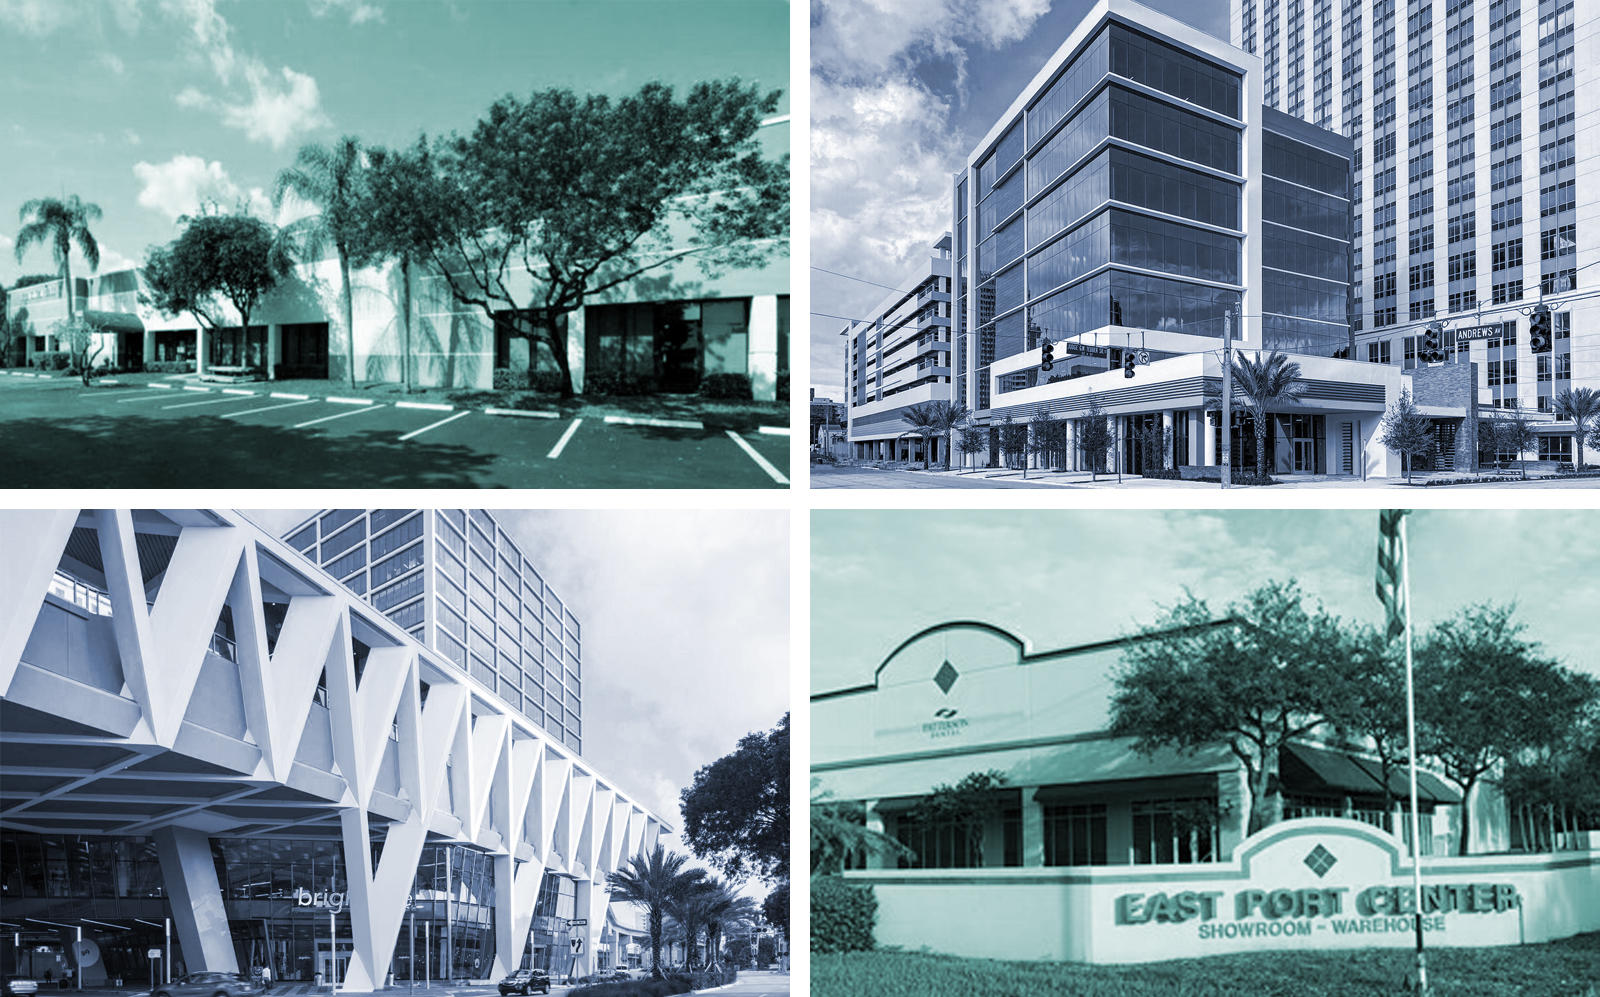 5553 Anglers Avenue, 550 Building, MiamiCentral and East Port Center. (Berger Commercial Realty, JLL, Brightline)